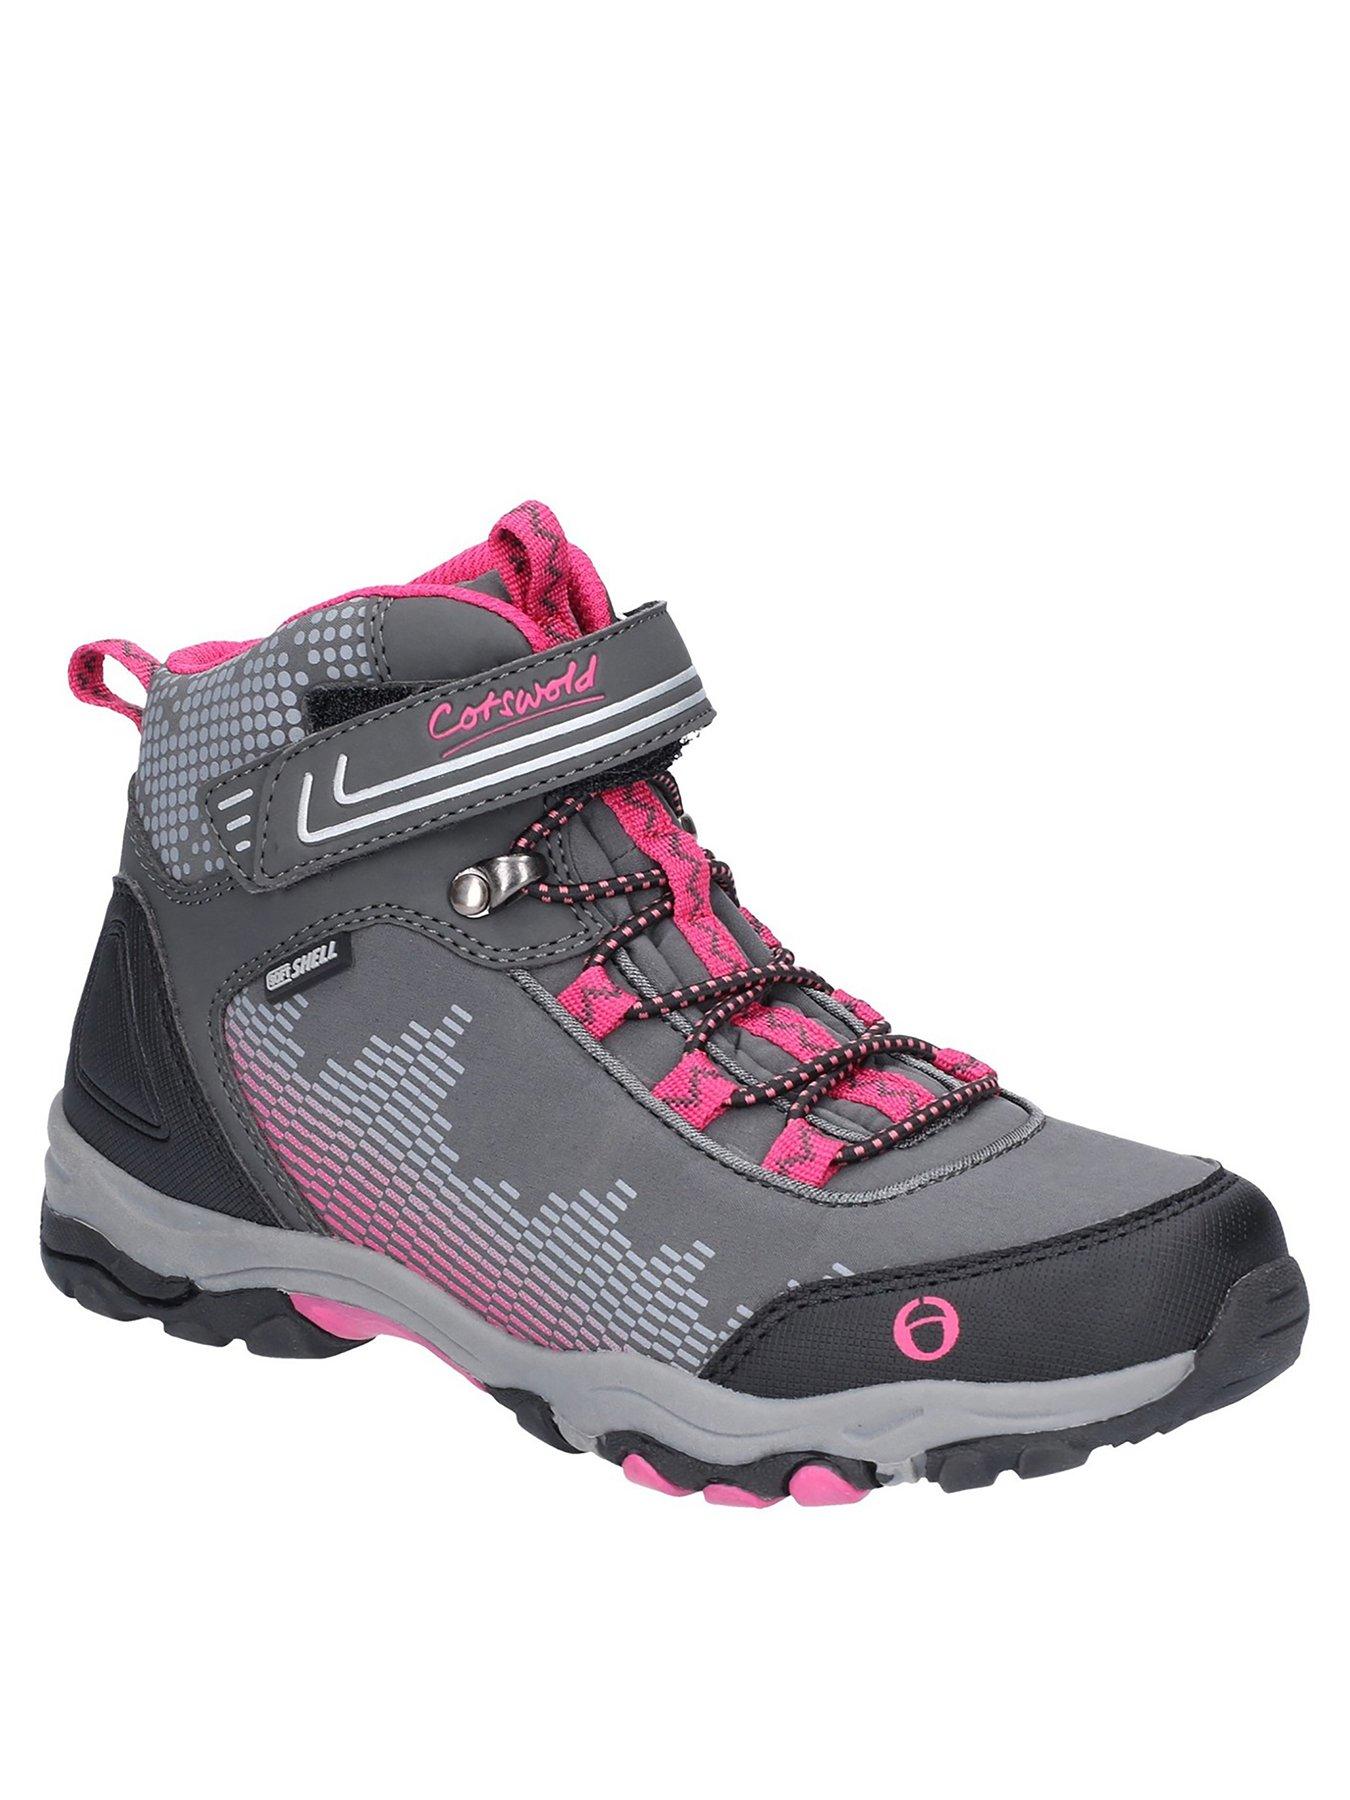 Shoes & boots Ducklinton Lace Hiker Boot - Grey/Pink